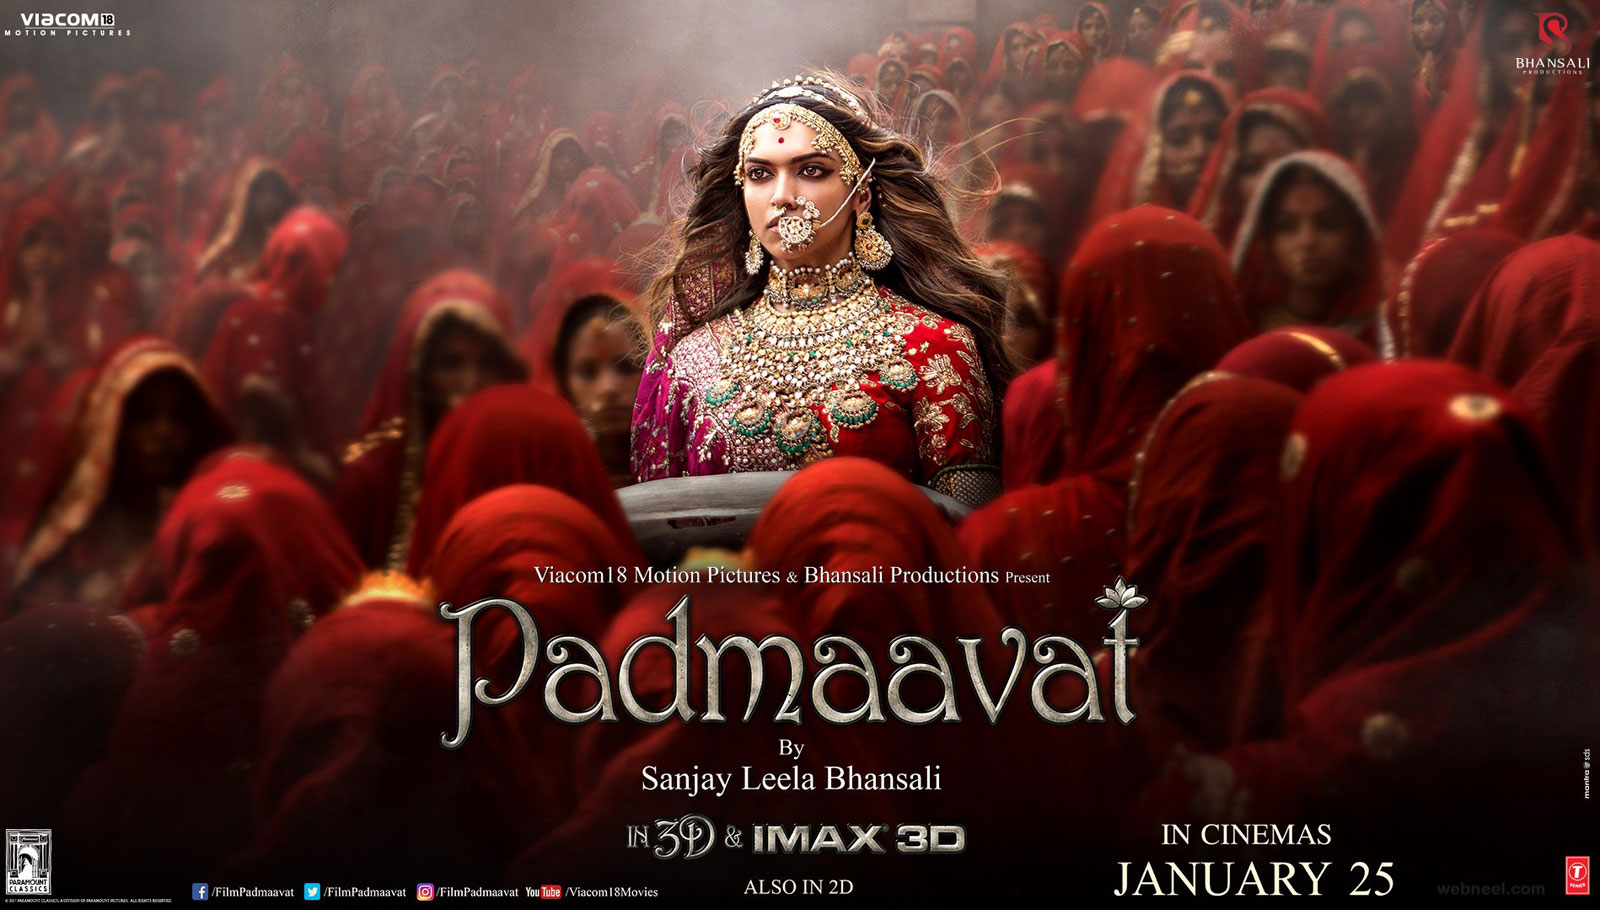 india movie poster design bollywood padmaavat